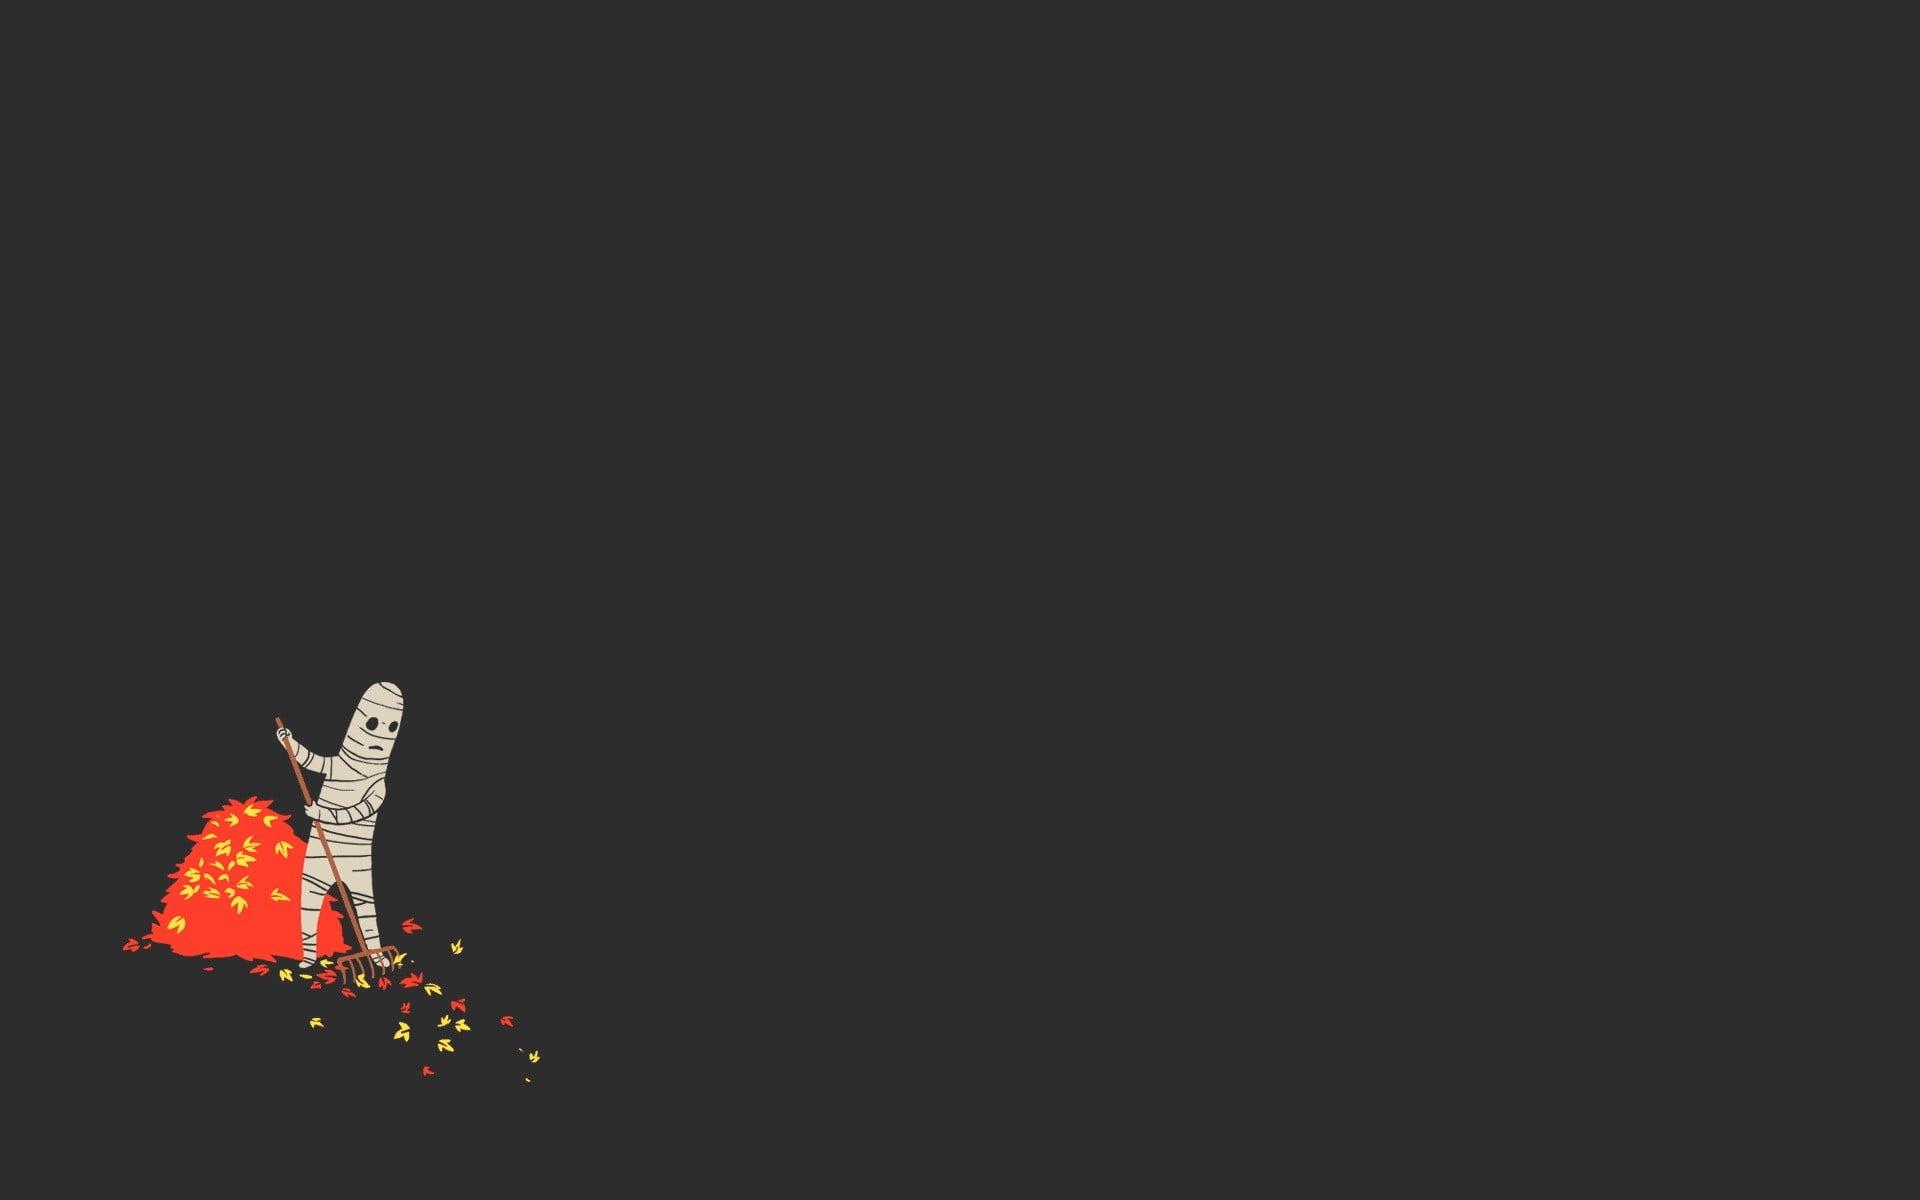 Person sweeping leaves animated wallpaper, minimalism